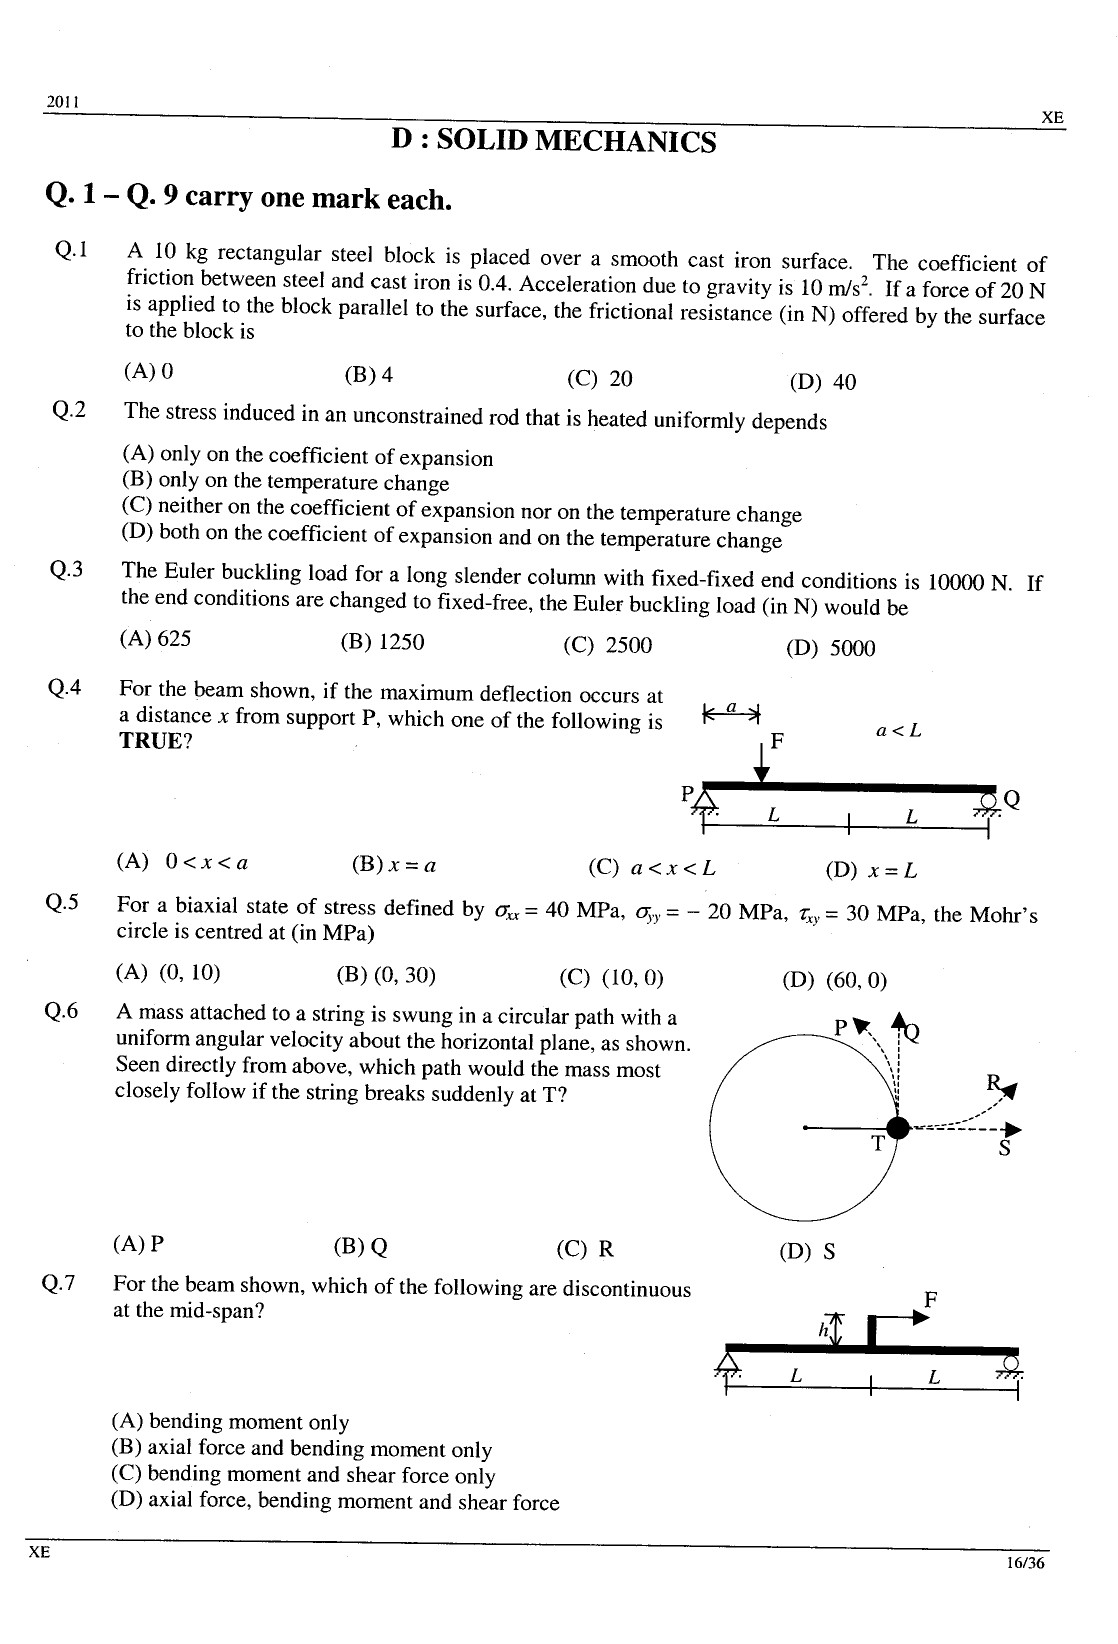 GATE Exam Question Paper 2011 Engineering Sciences 16